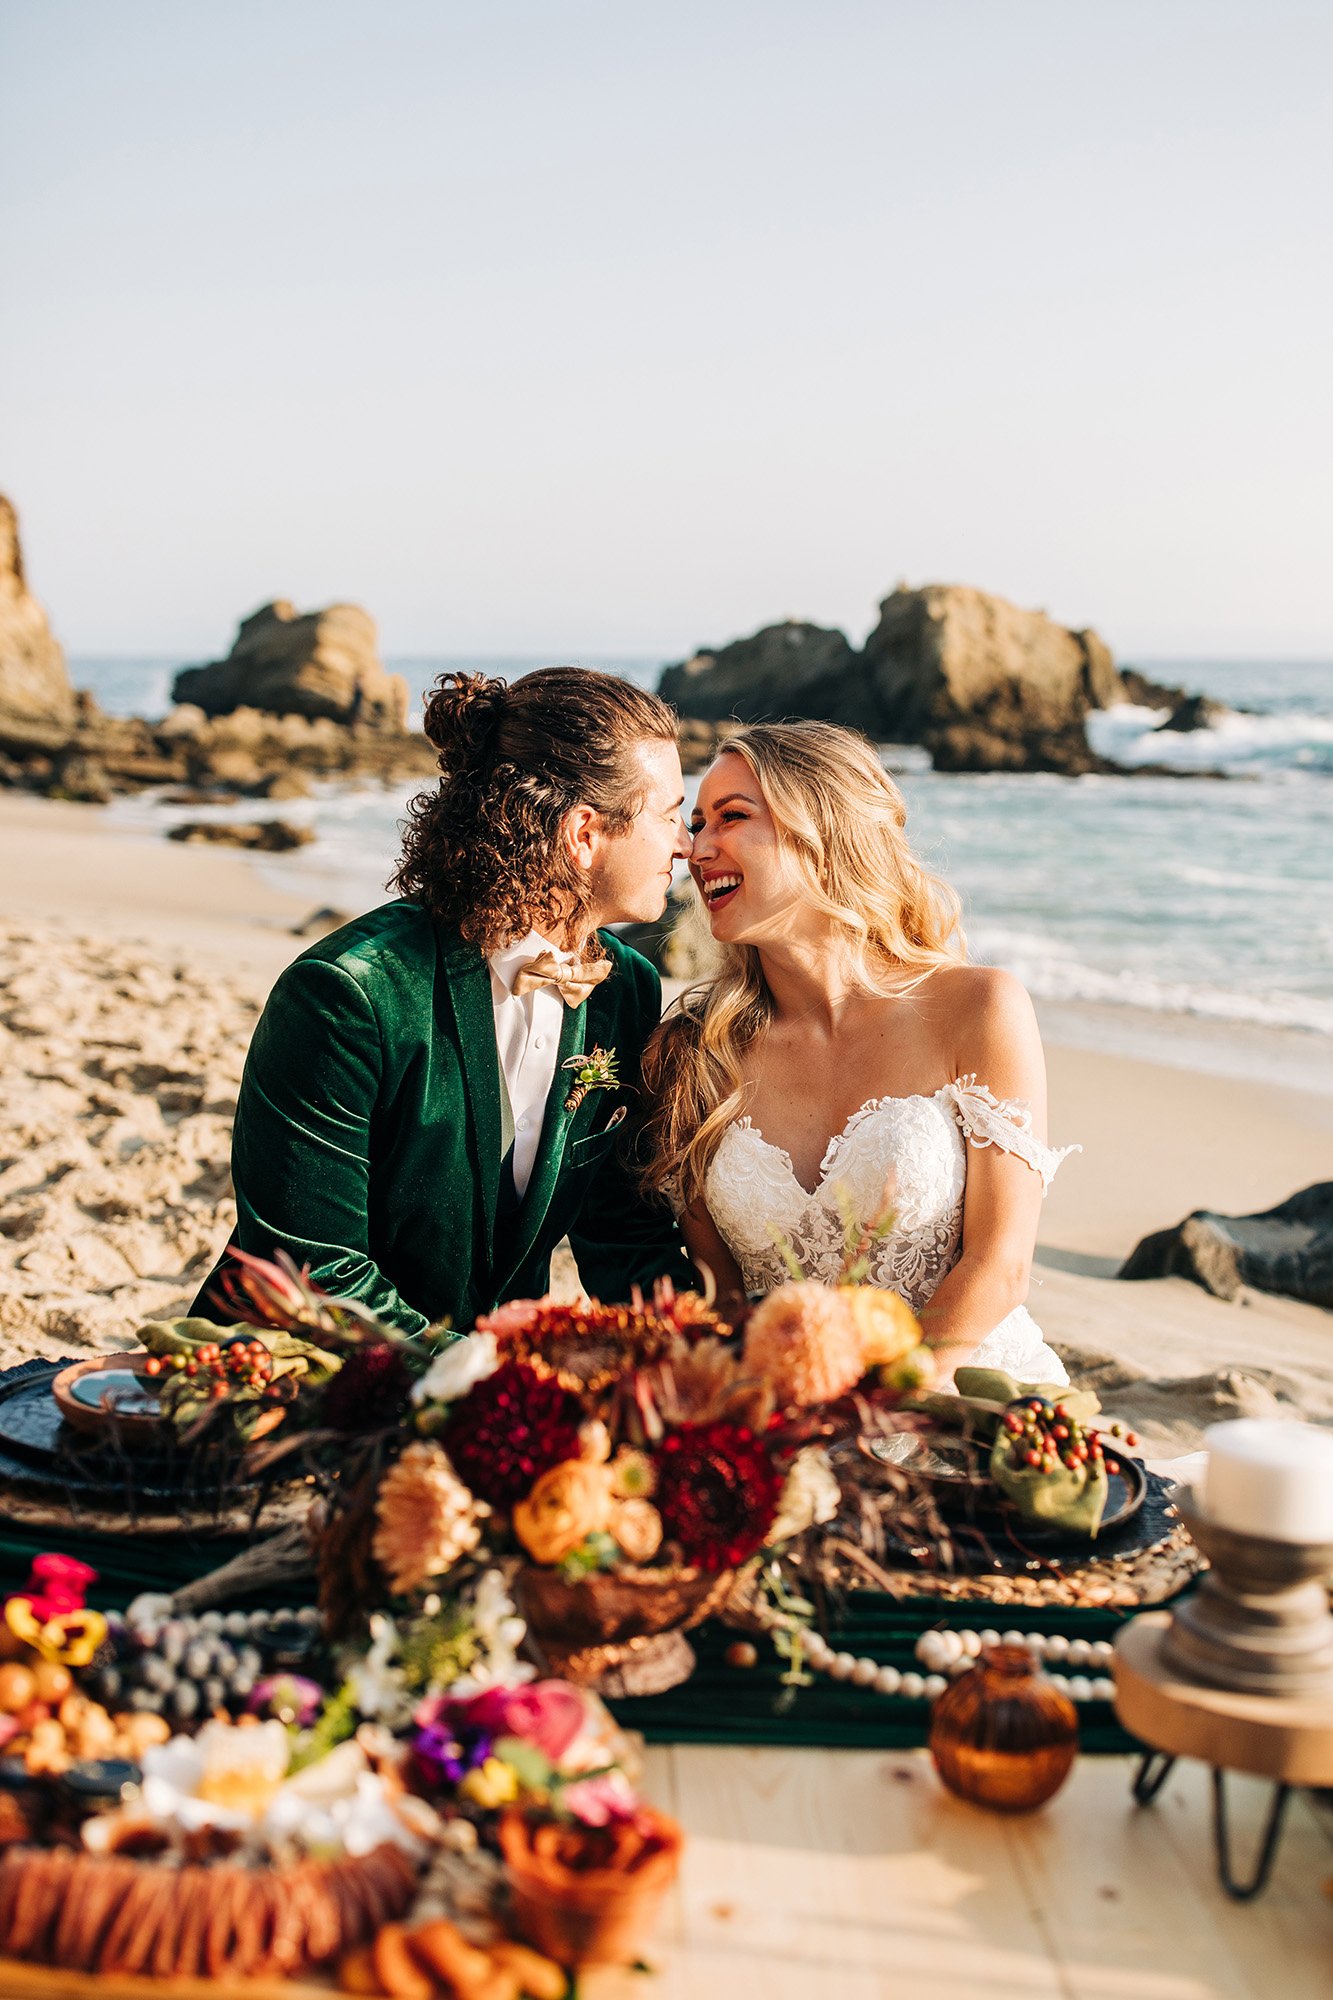 A couple laughs together at their picnic beach wedding.